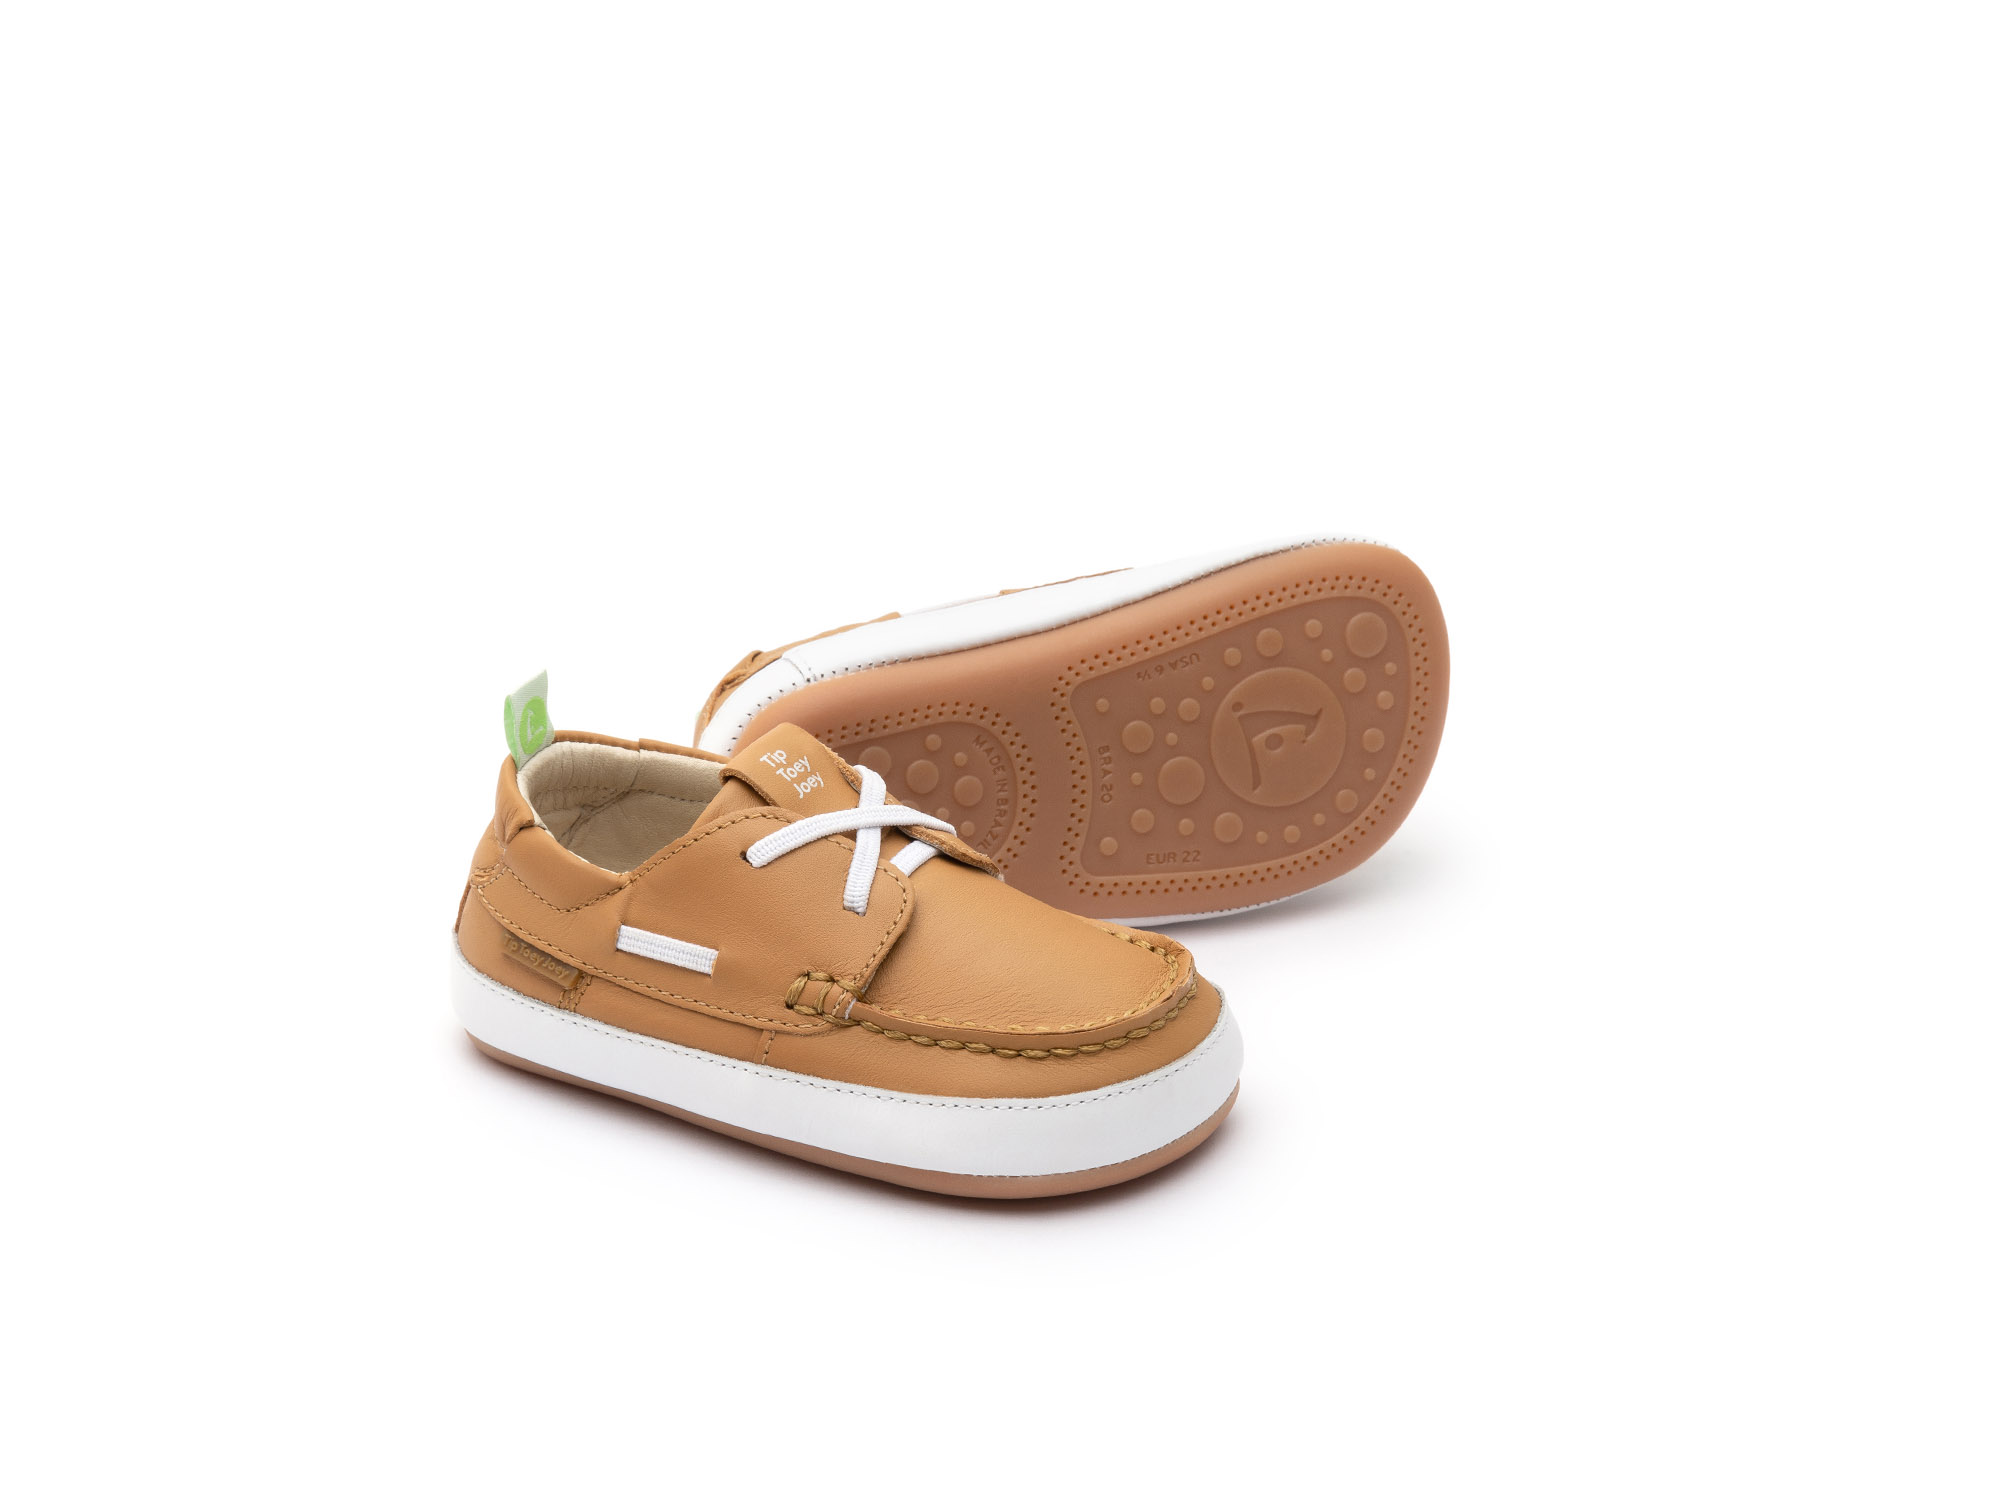 UP & GO Sneakers for Boys Boaty | Tip Toey Joey - Australia - 0